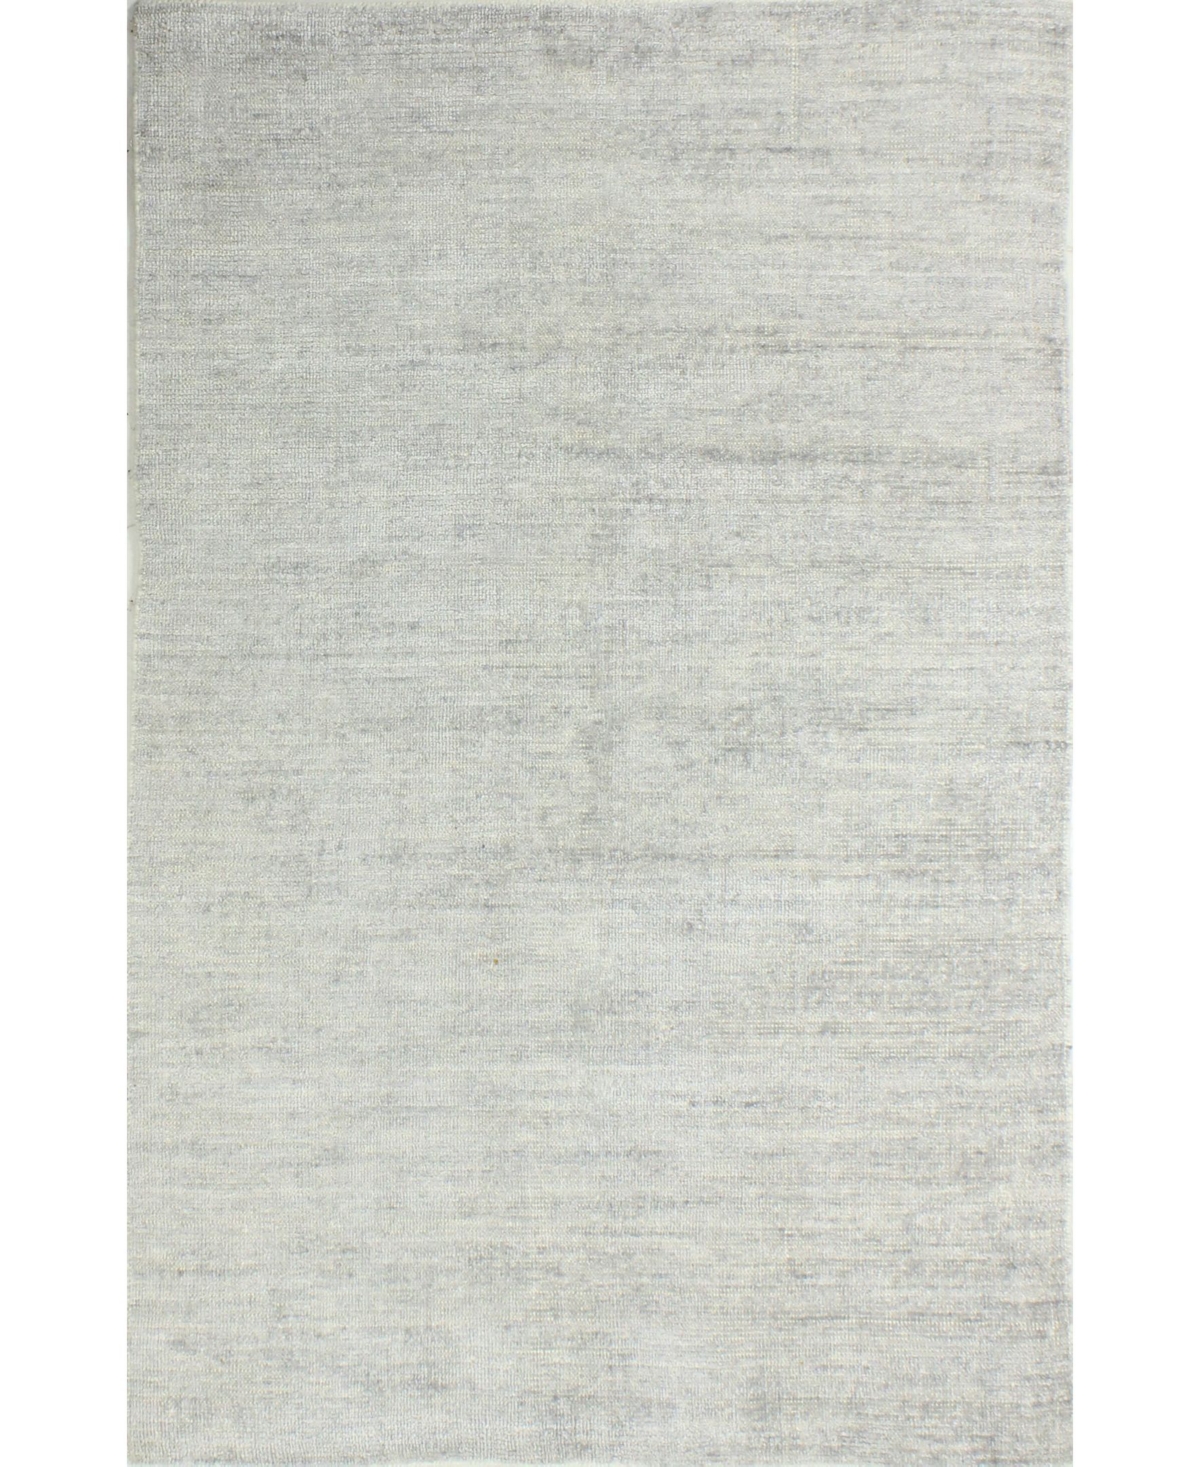 Closeout! Bb Rugs Hint V106 5' x 7'6in Area Rug - Silver